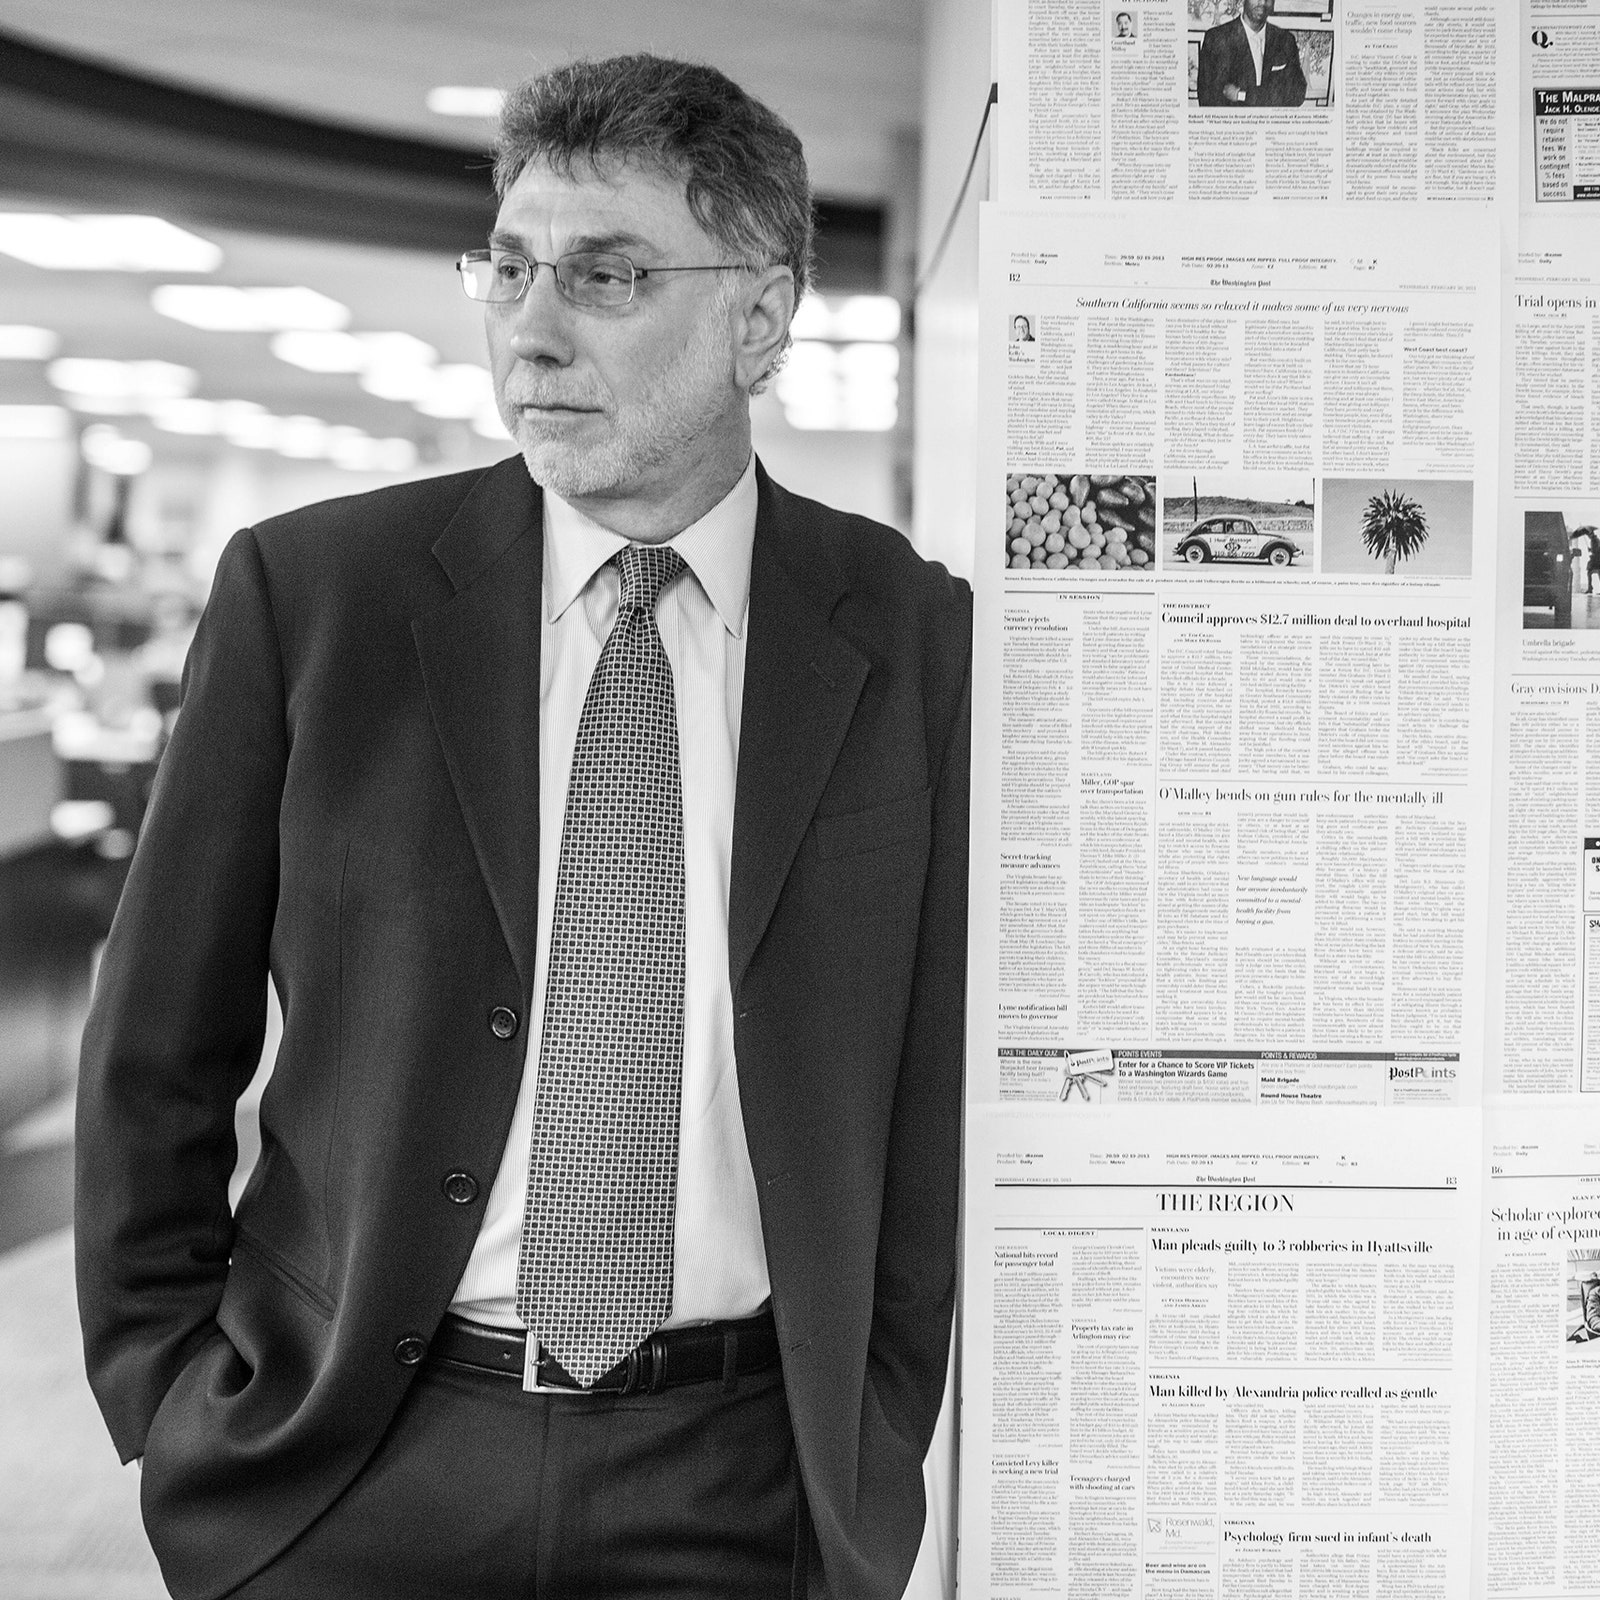 Blackandwhite photograph of Marty Baron standing in a newsroom wearing a suit.